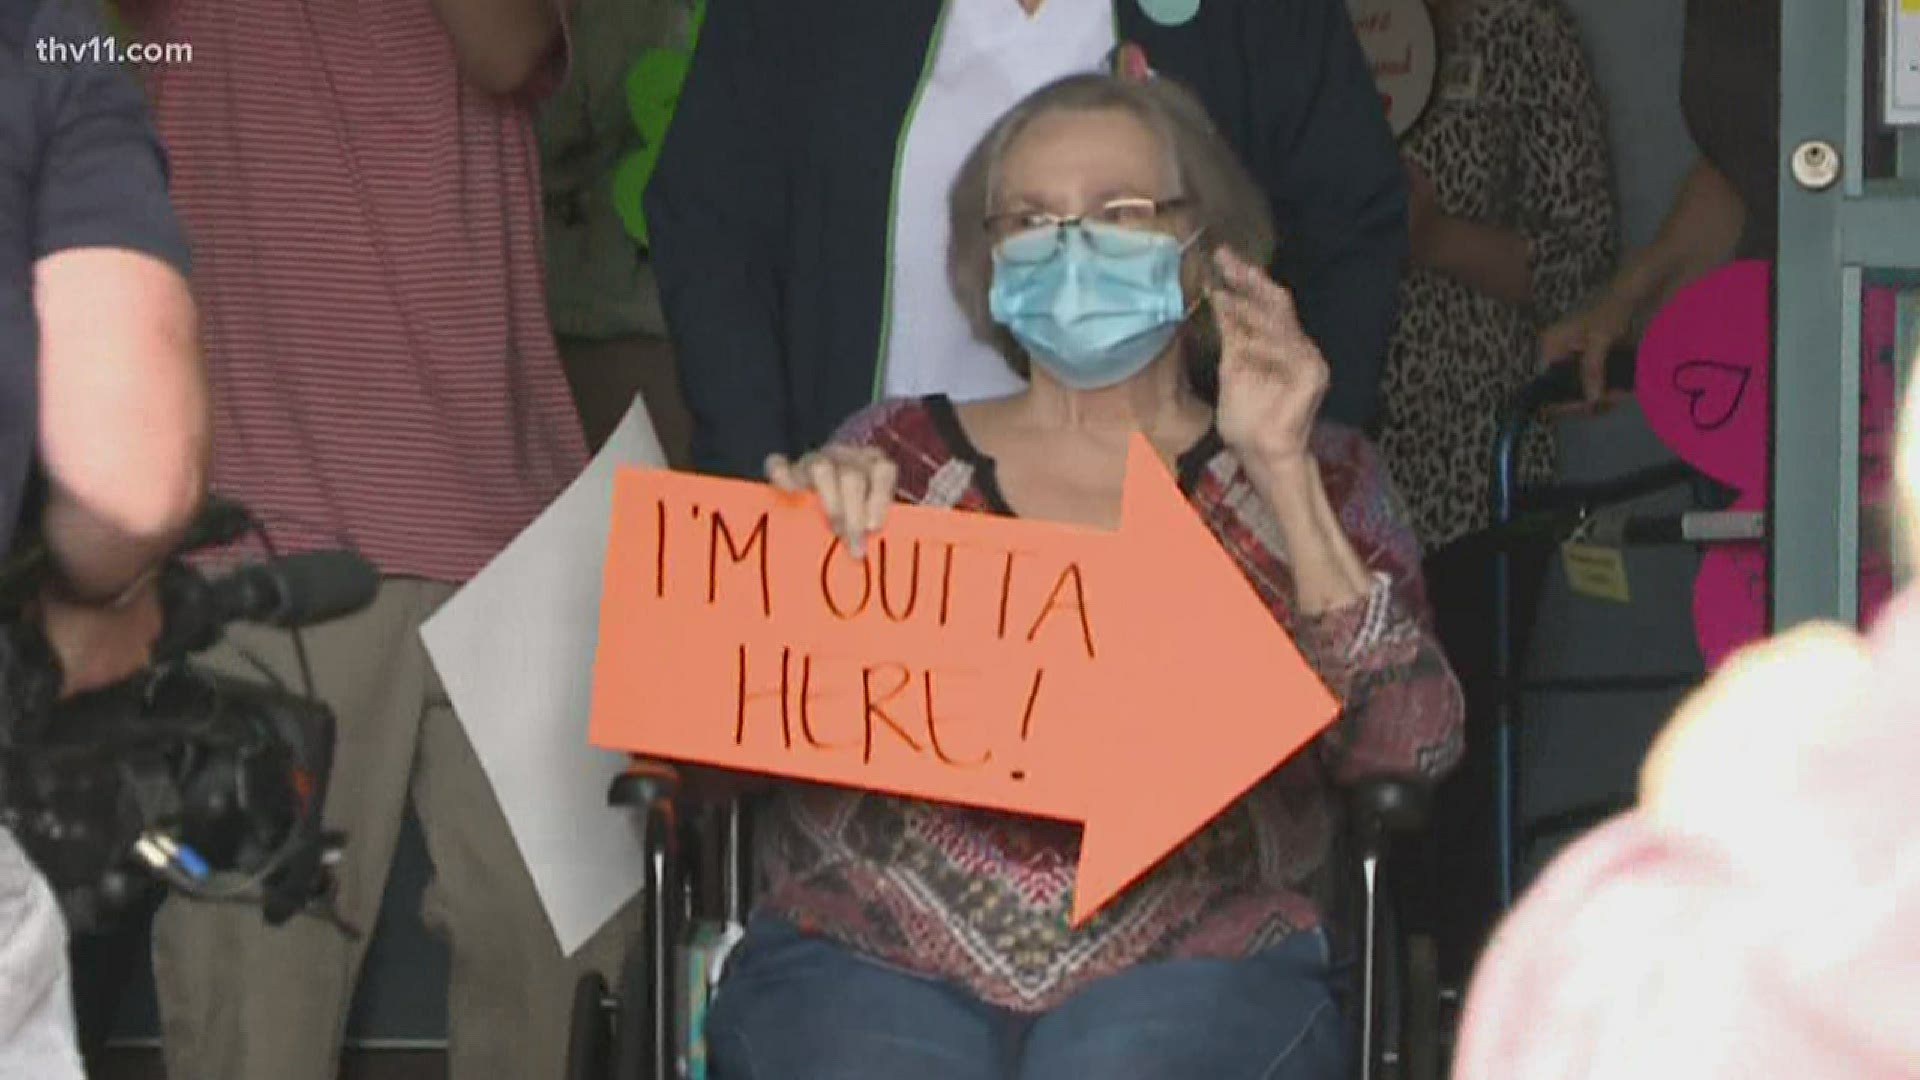 There's hope and a lot of happy tears today in Saline County. An elderly woman said goodbye to all her health care providers during a weeks long COVID-19 fight.